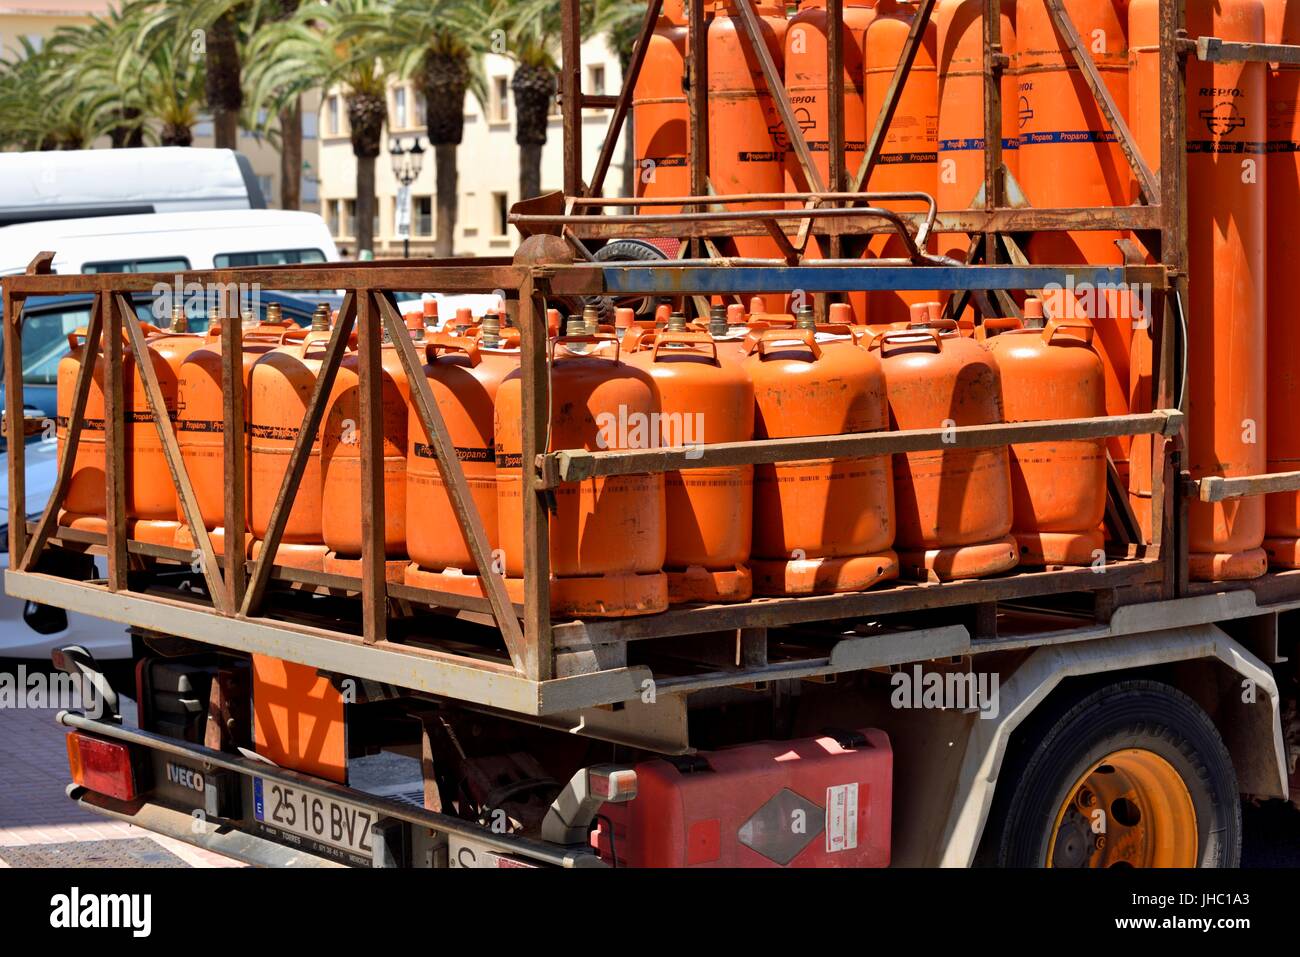 Propane gas bottles on a delivery lorry. Stock Photo